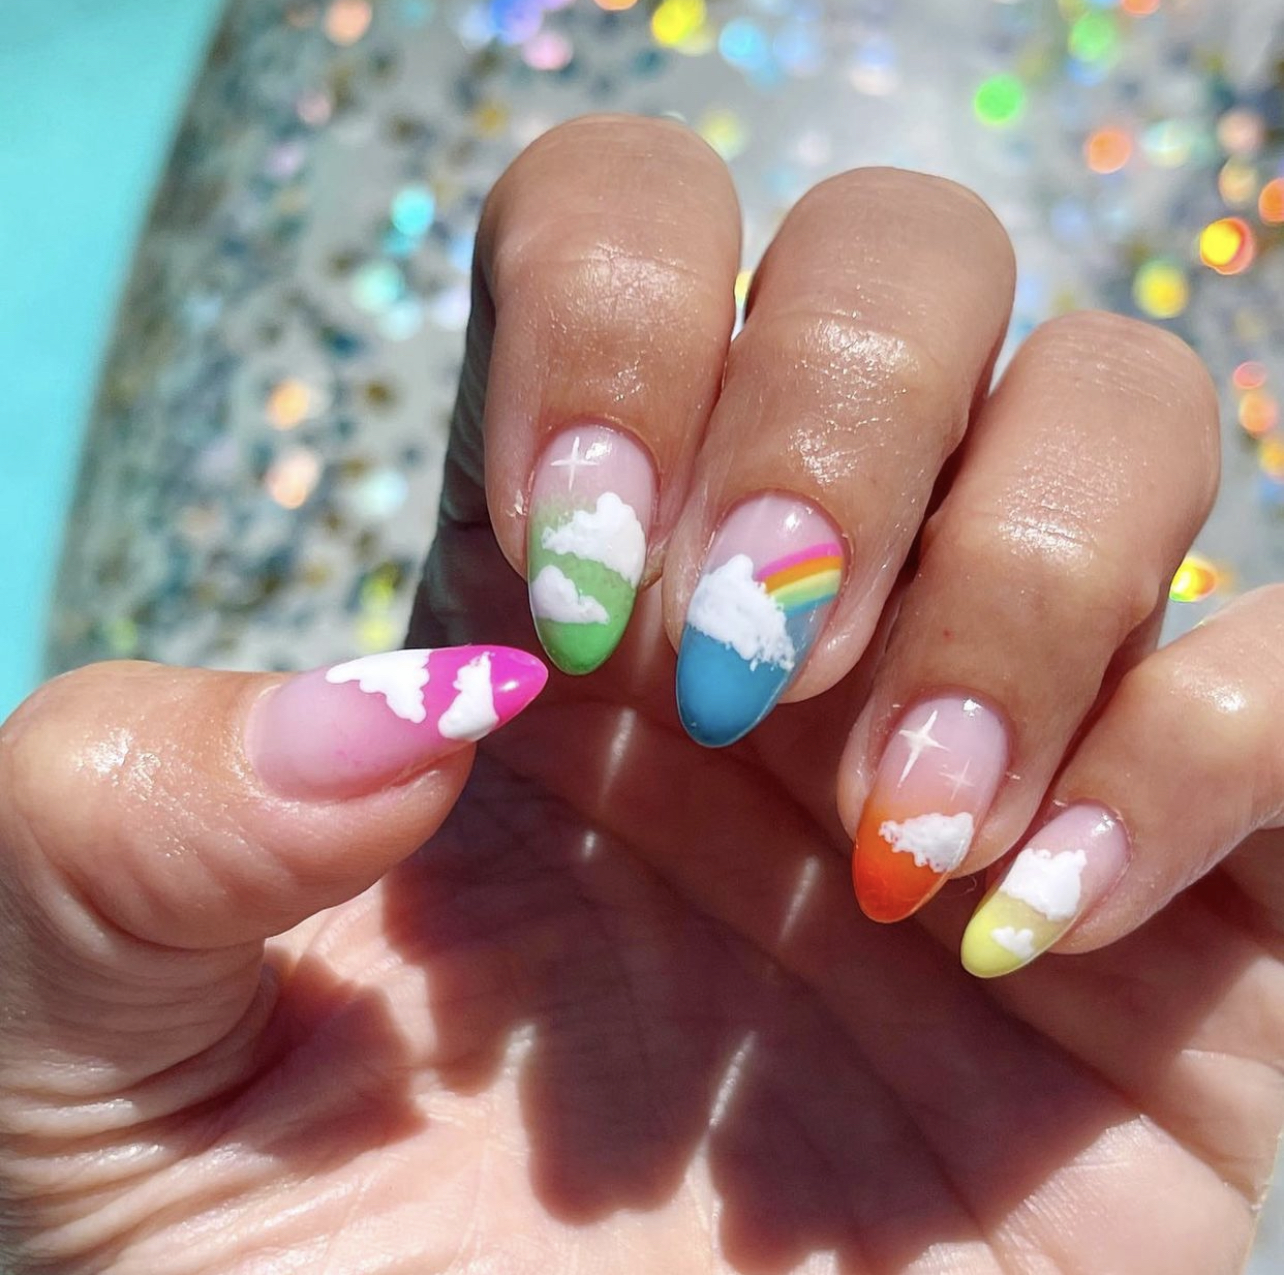 rainbow nails with clouds